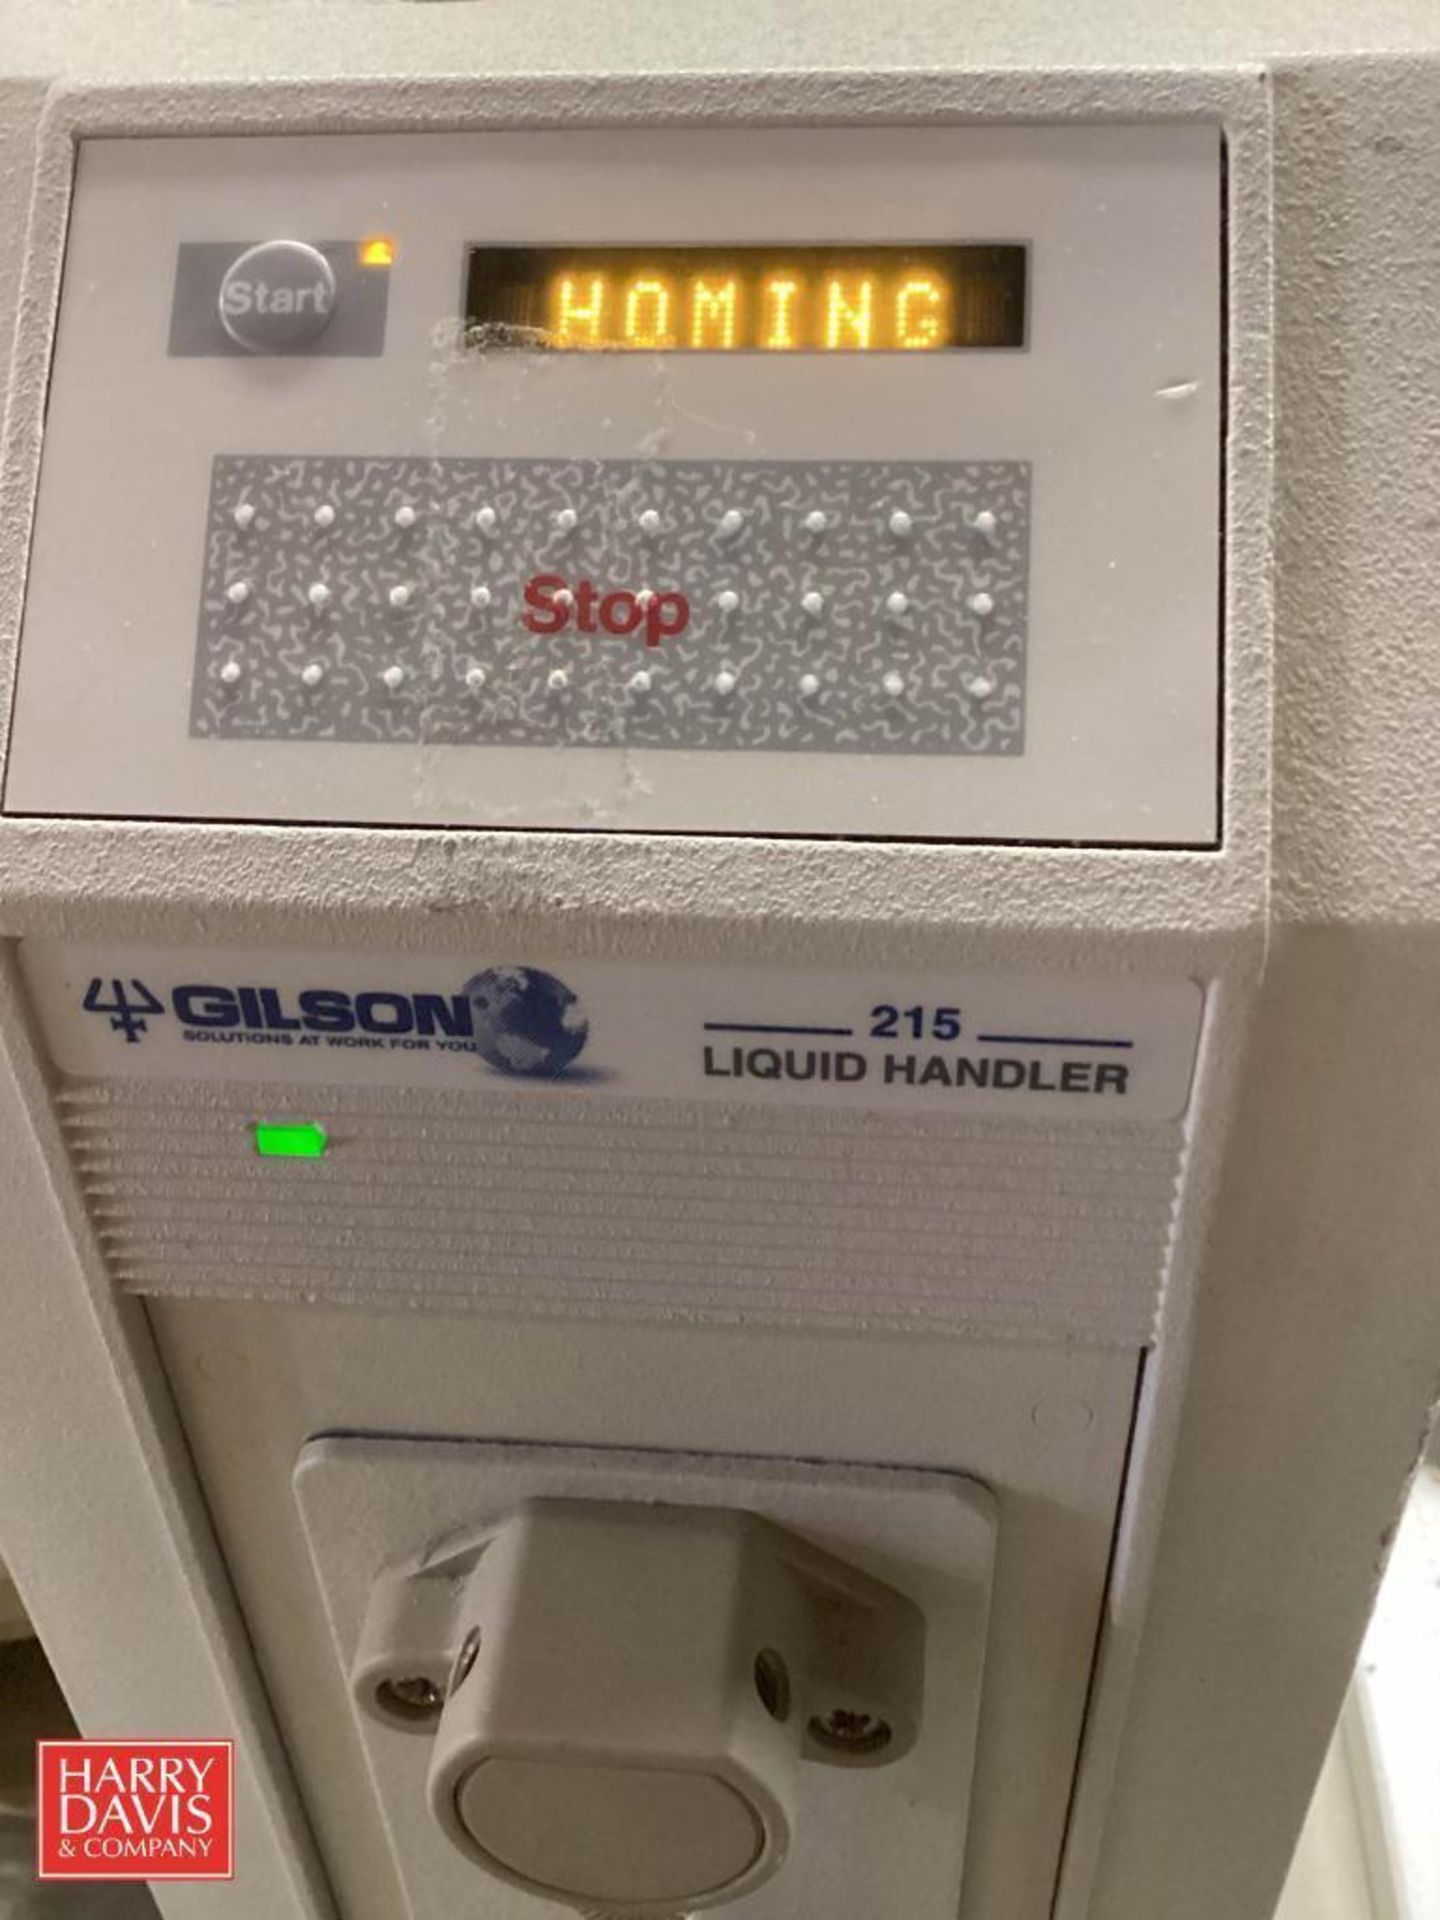 Gilson 215 Liquid Handler with Models 515, 811C, 306, 819 and UV/VIS-155 - Image 7 of 8